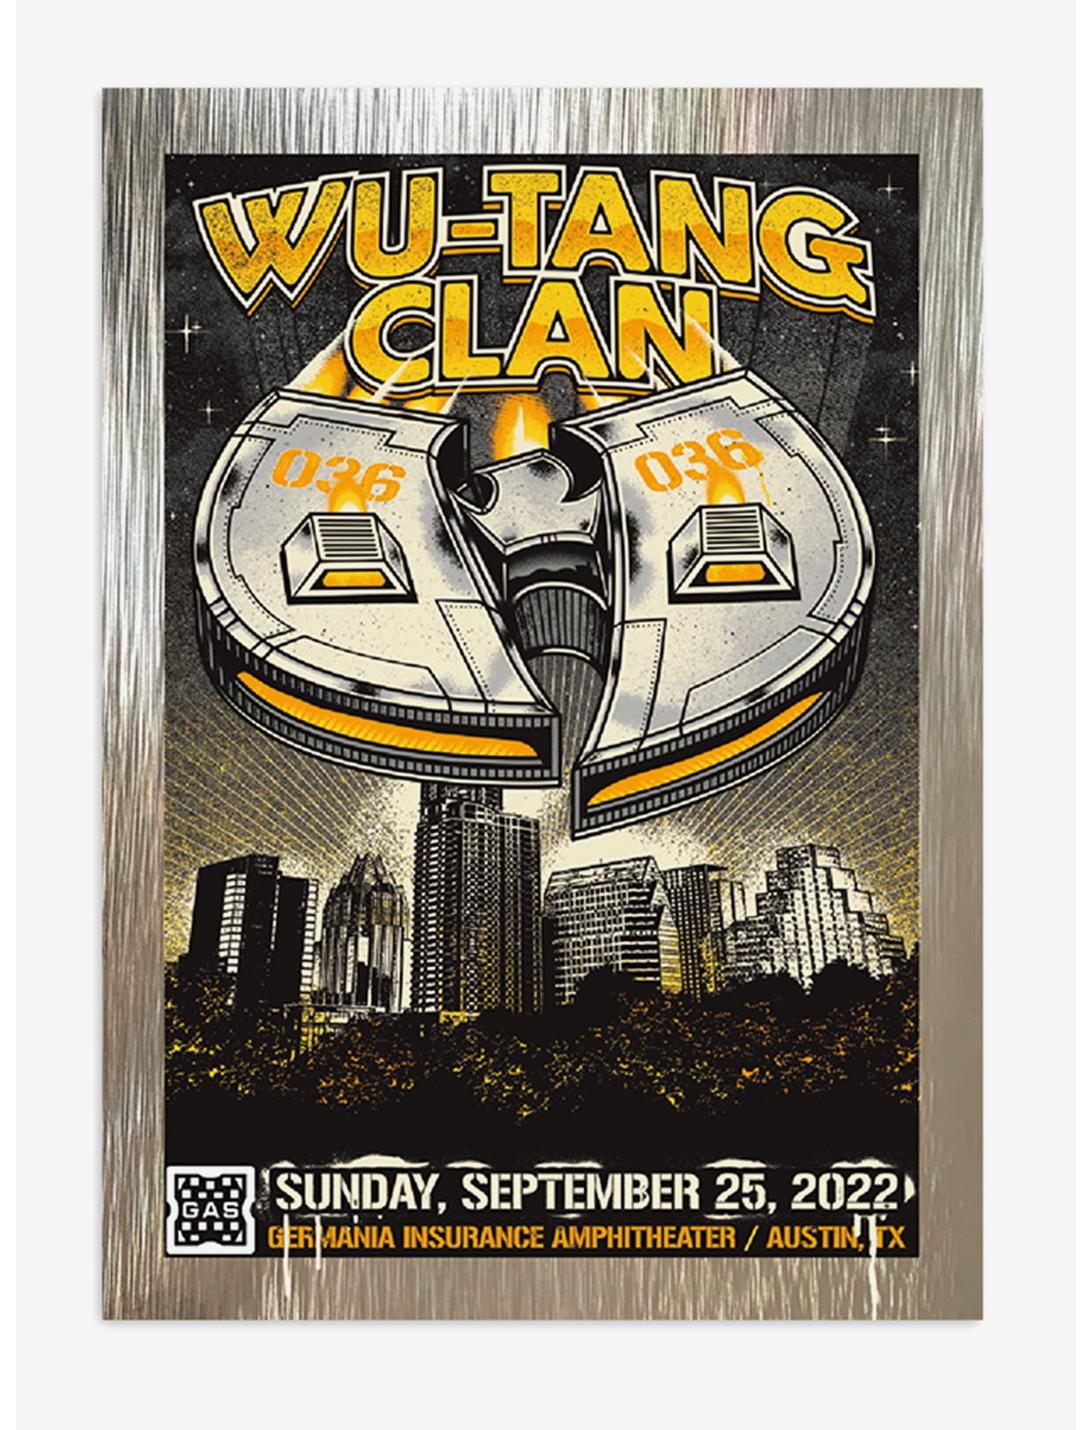 Wu-Tang Clan N.Y. State Of Mind 2022 Tour September 25 Collectible Card, , hi-res